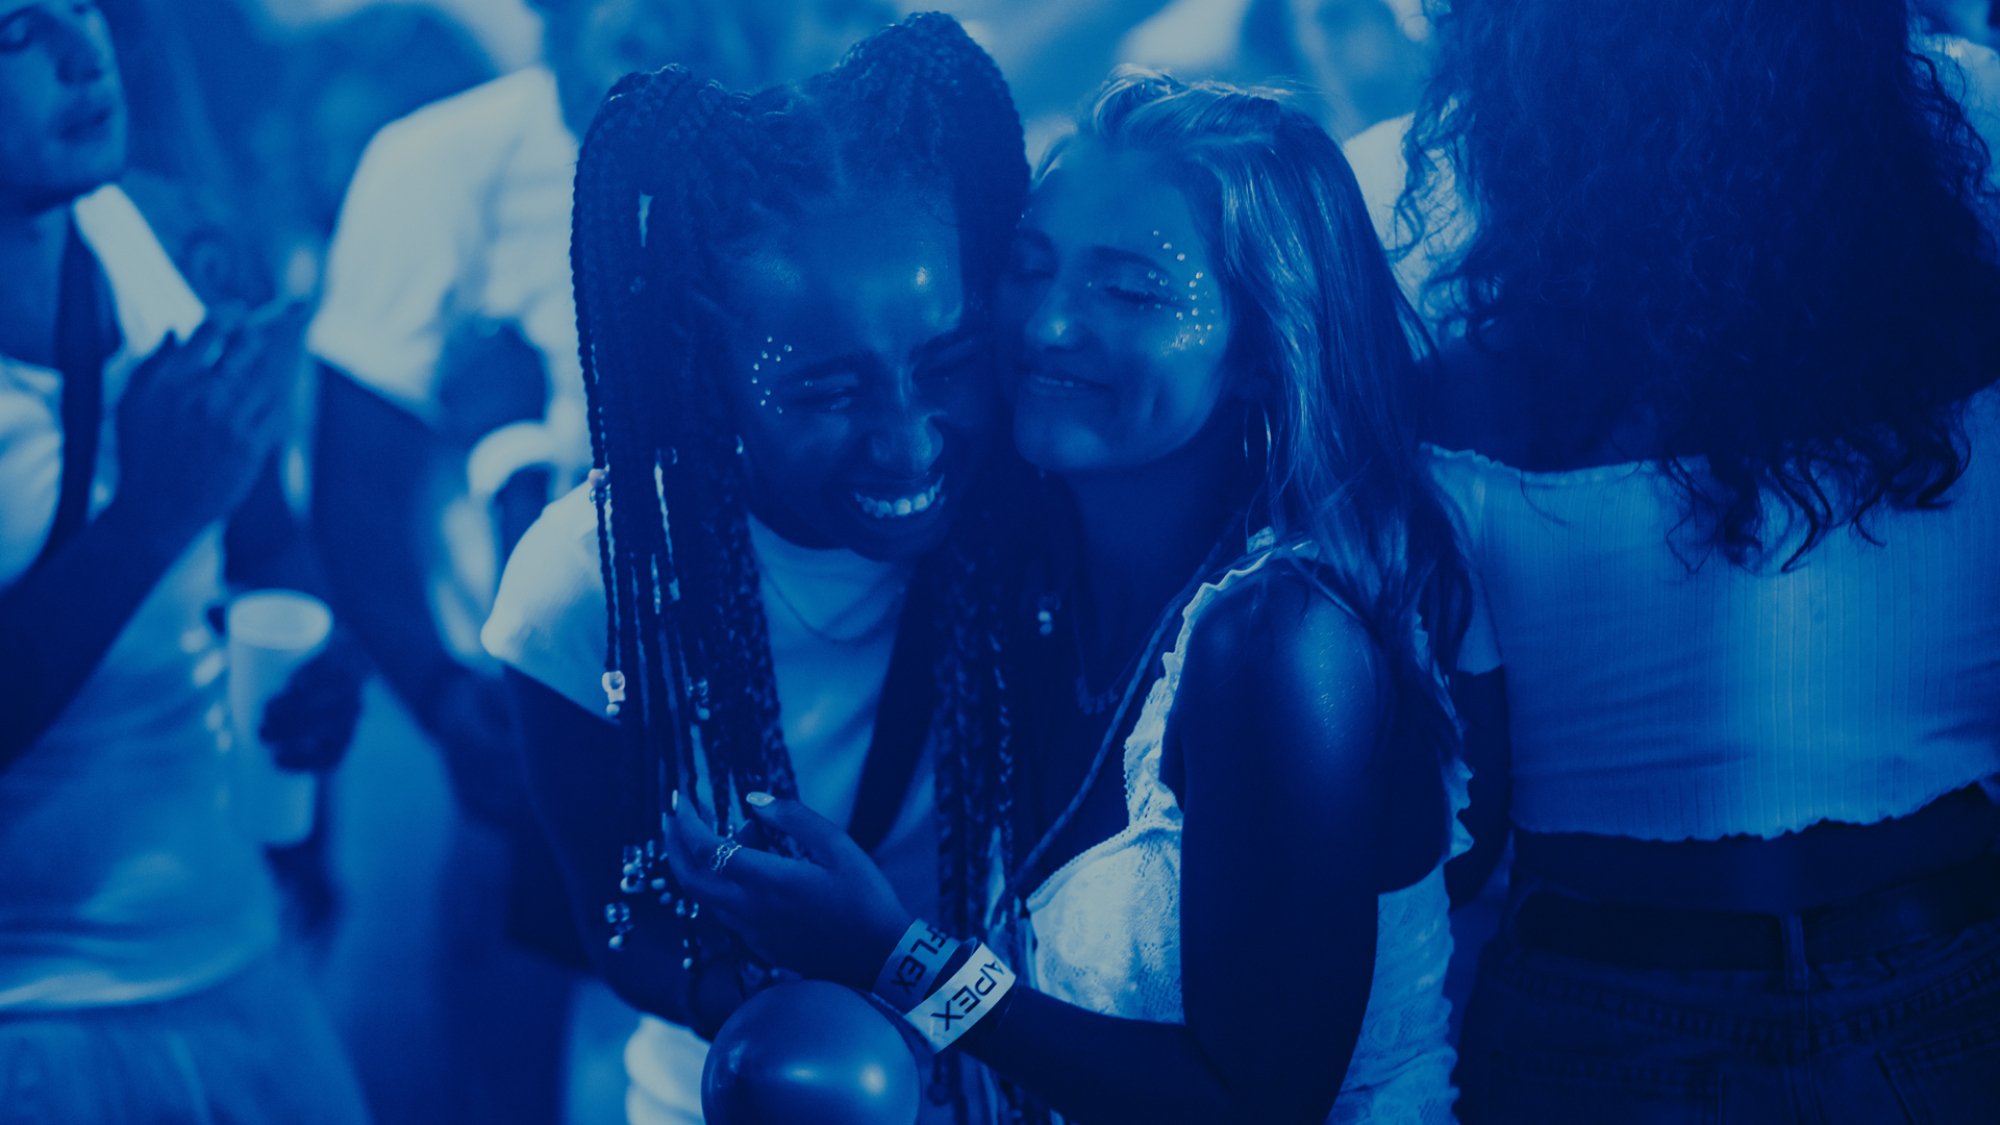 Two teen girls hug on a dancefloor with their eyes closed and smiling.